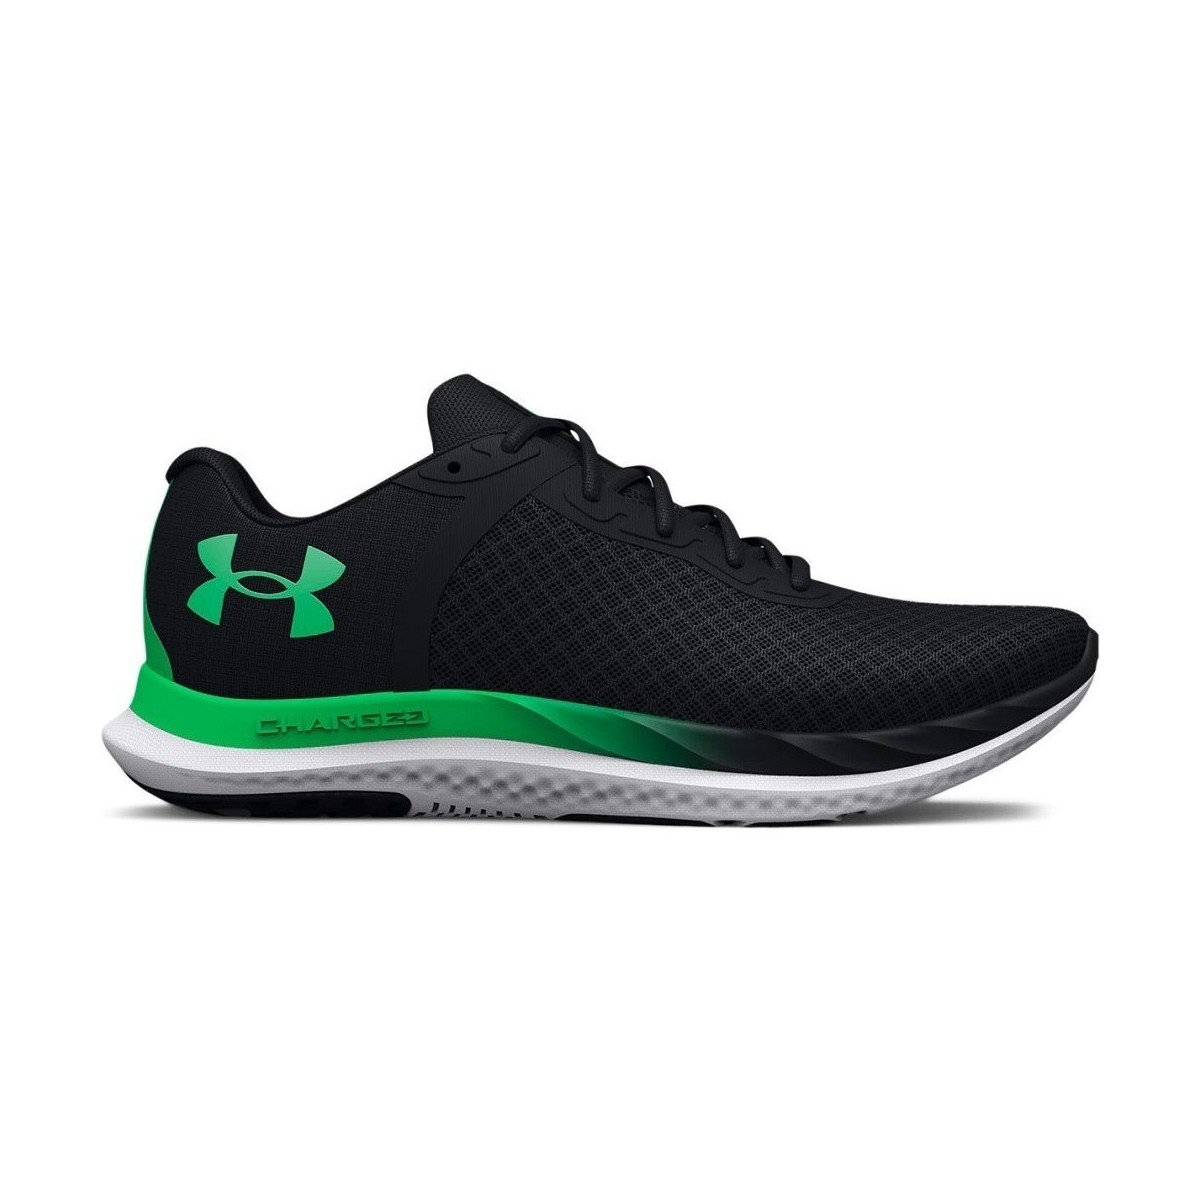 Under Armour Charged Breeze Black